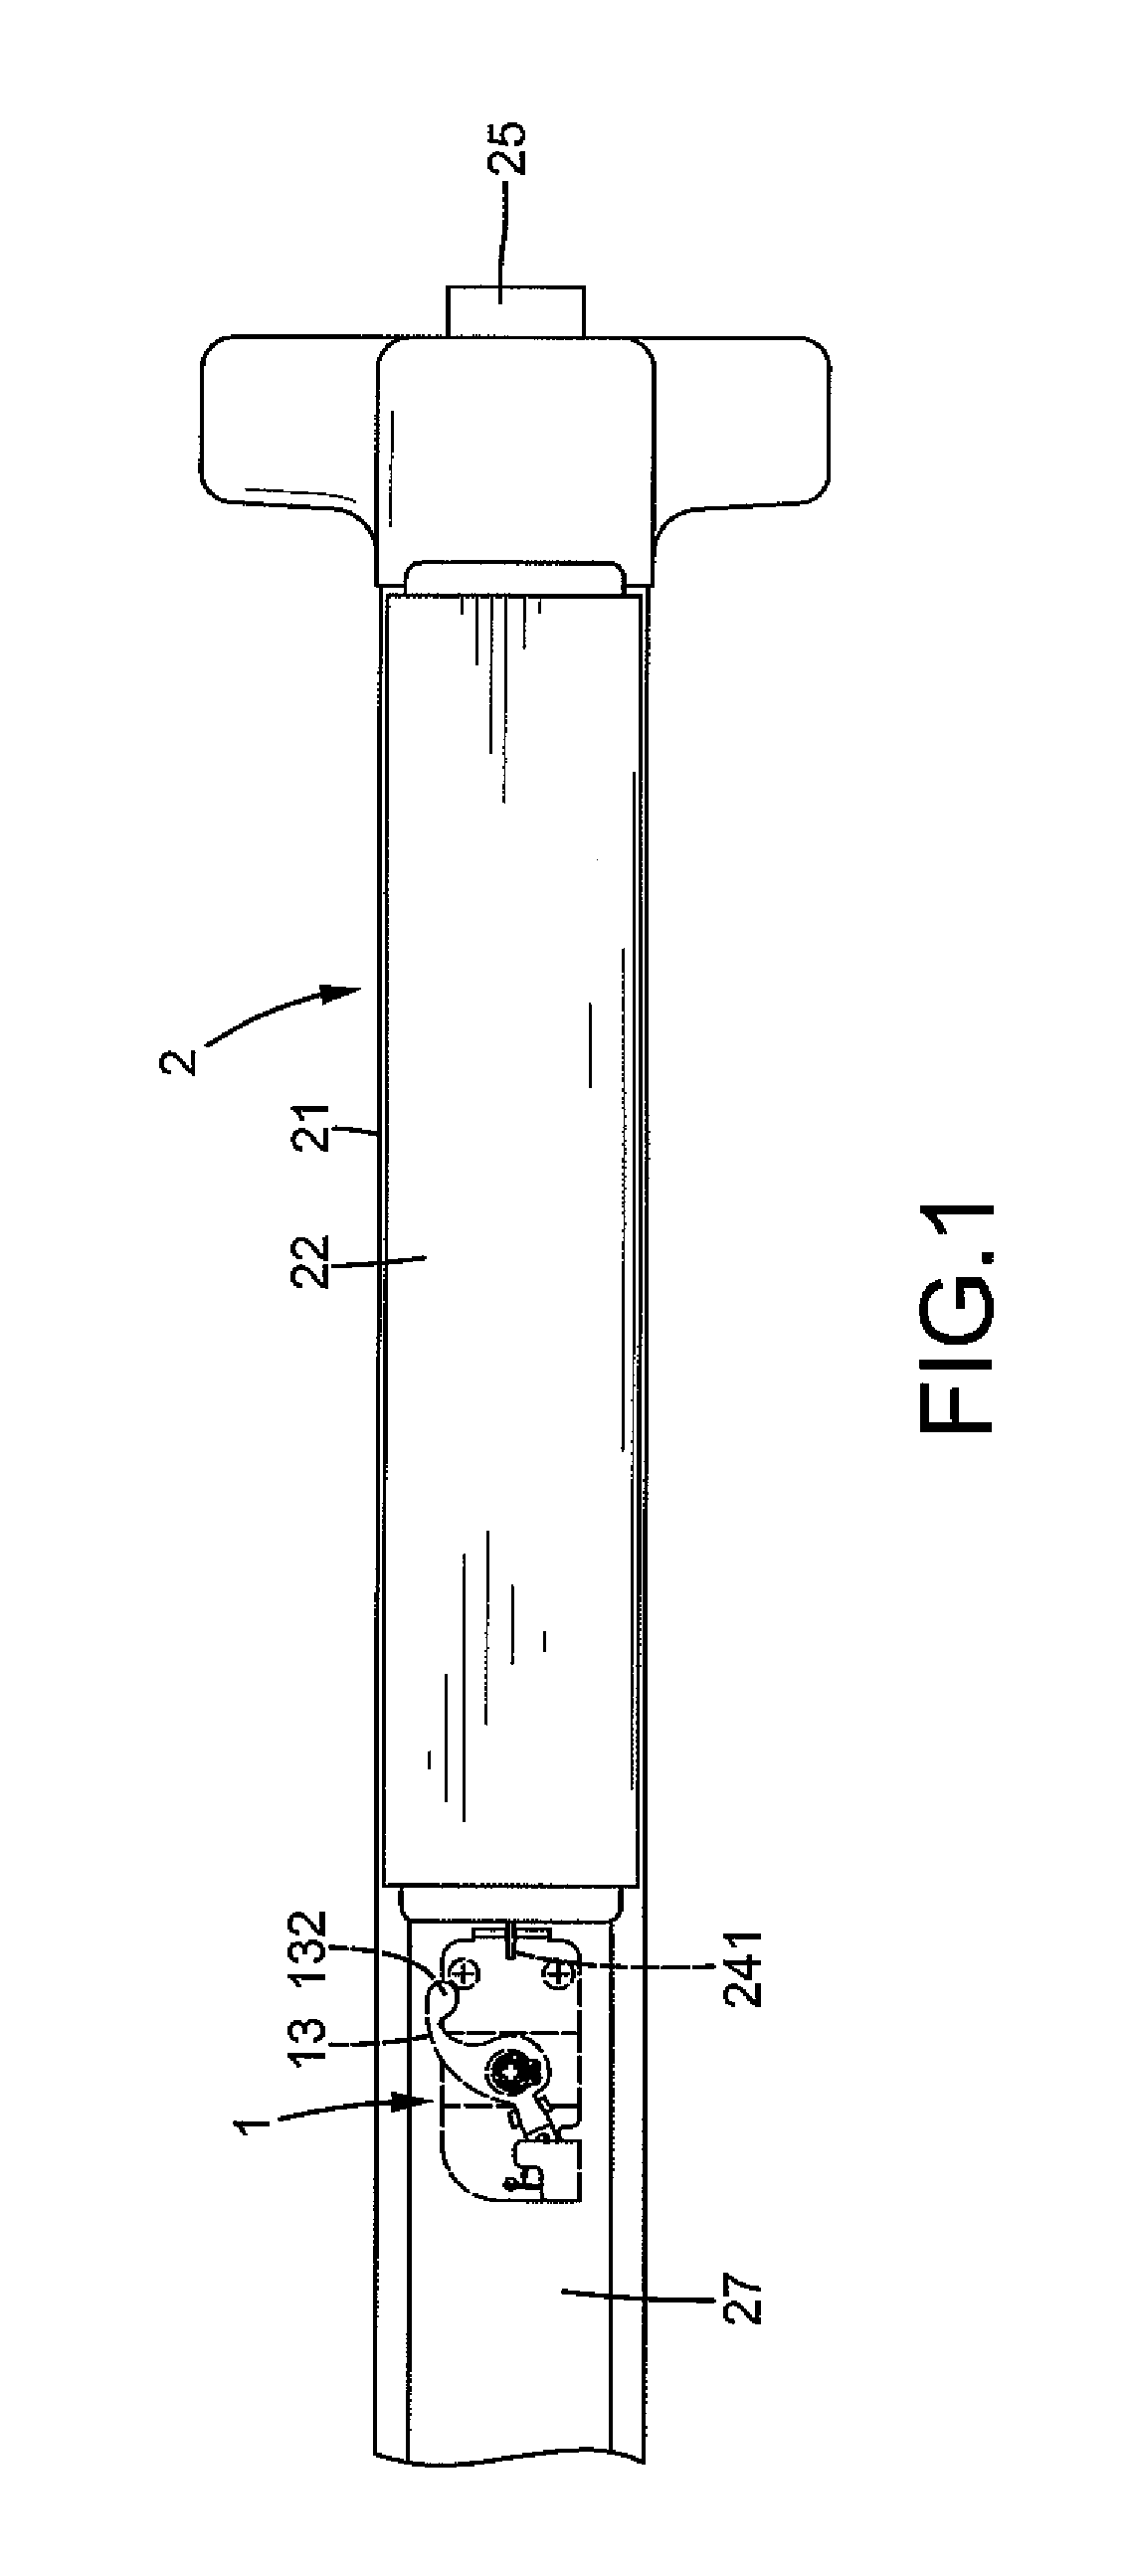 Dogging device for latch assembly